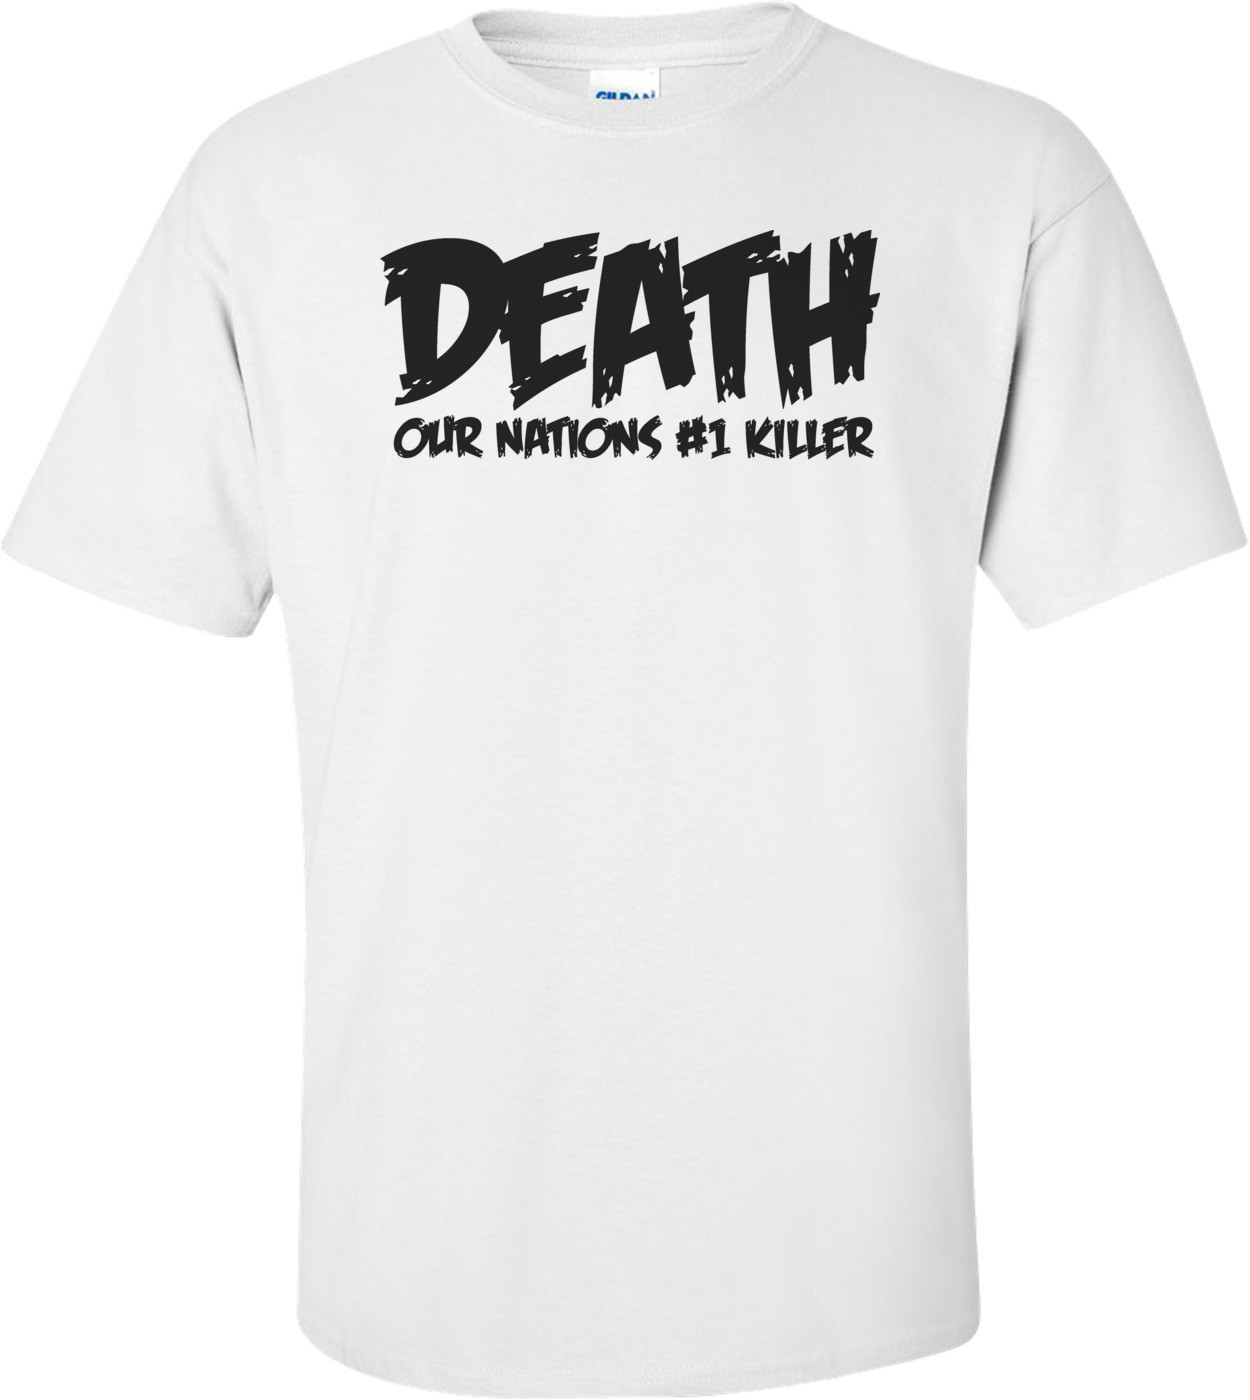 Death Our Nations #1 Killer Funny T-shirt